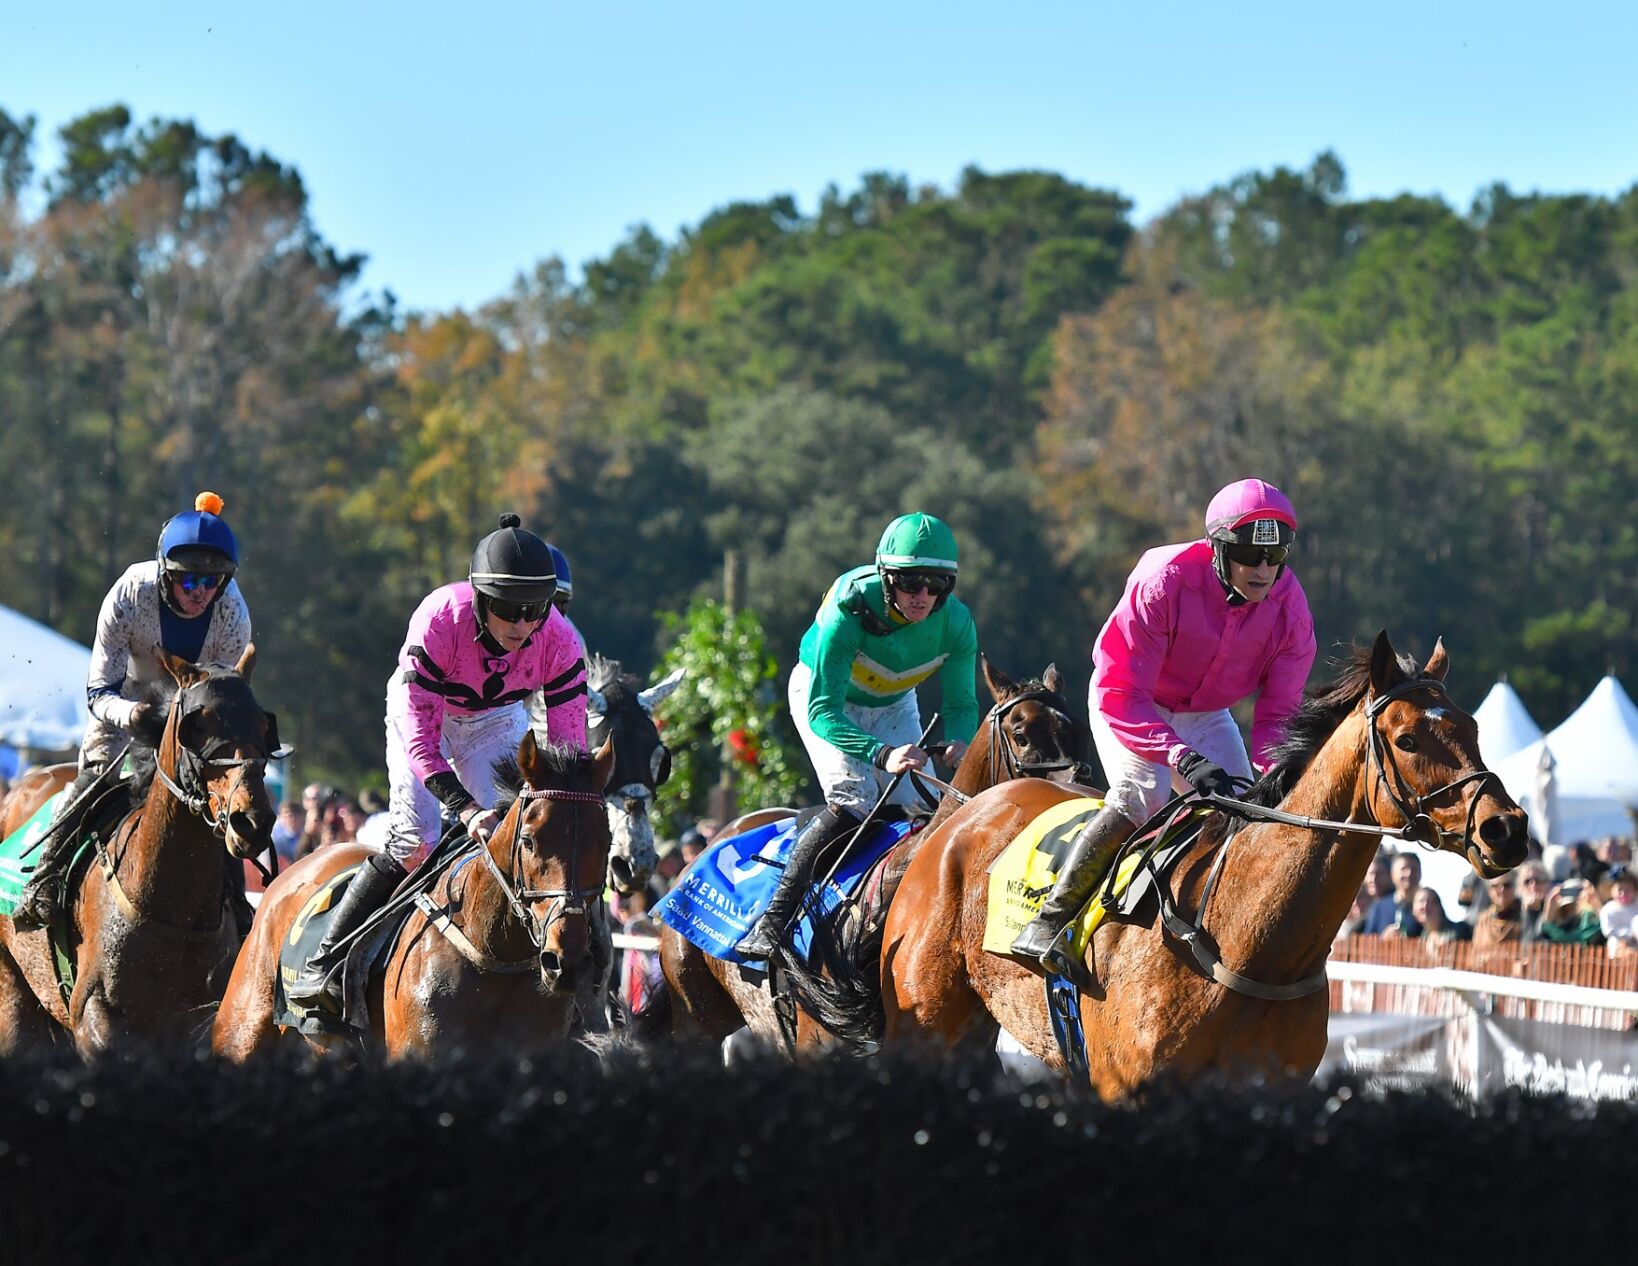 The 2020 Steeplechase of Charleston has returned to its roots